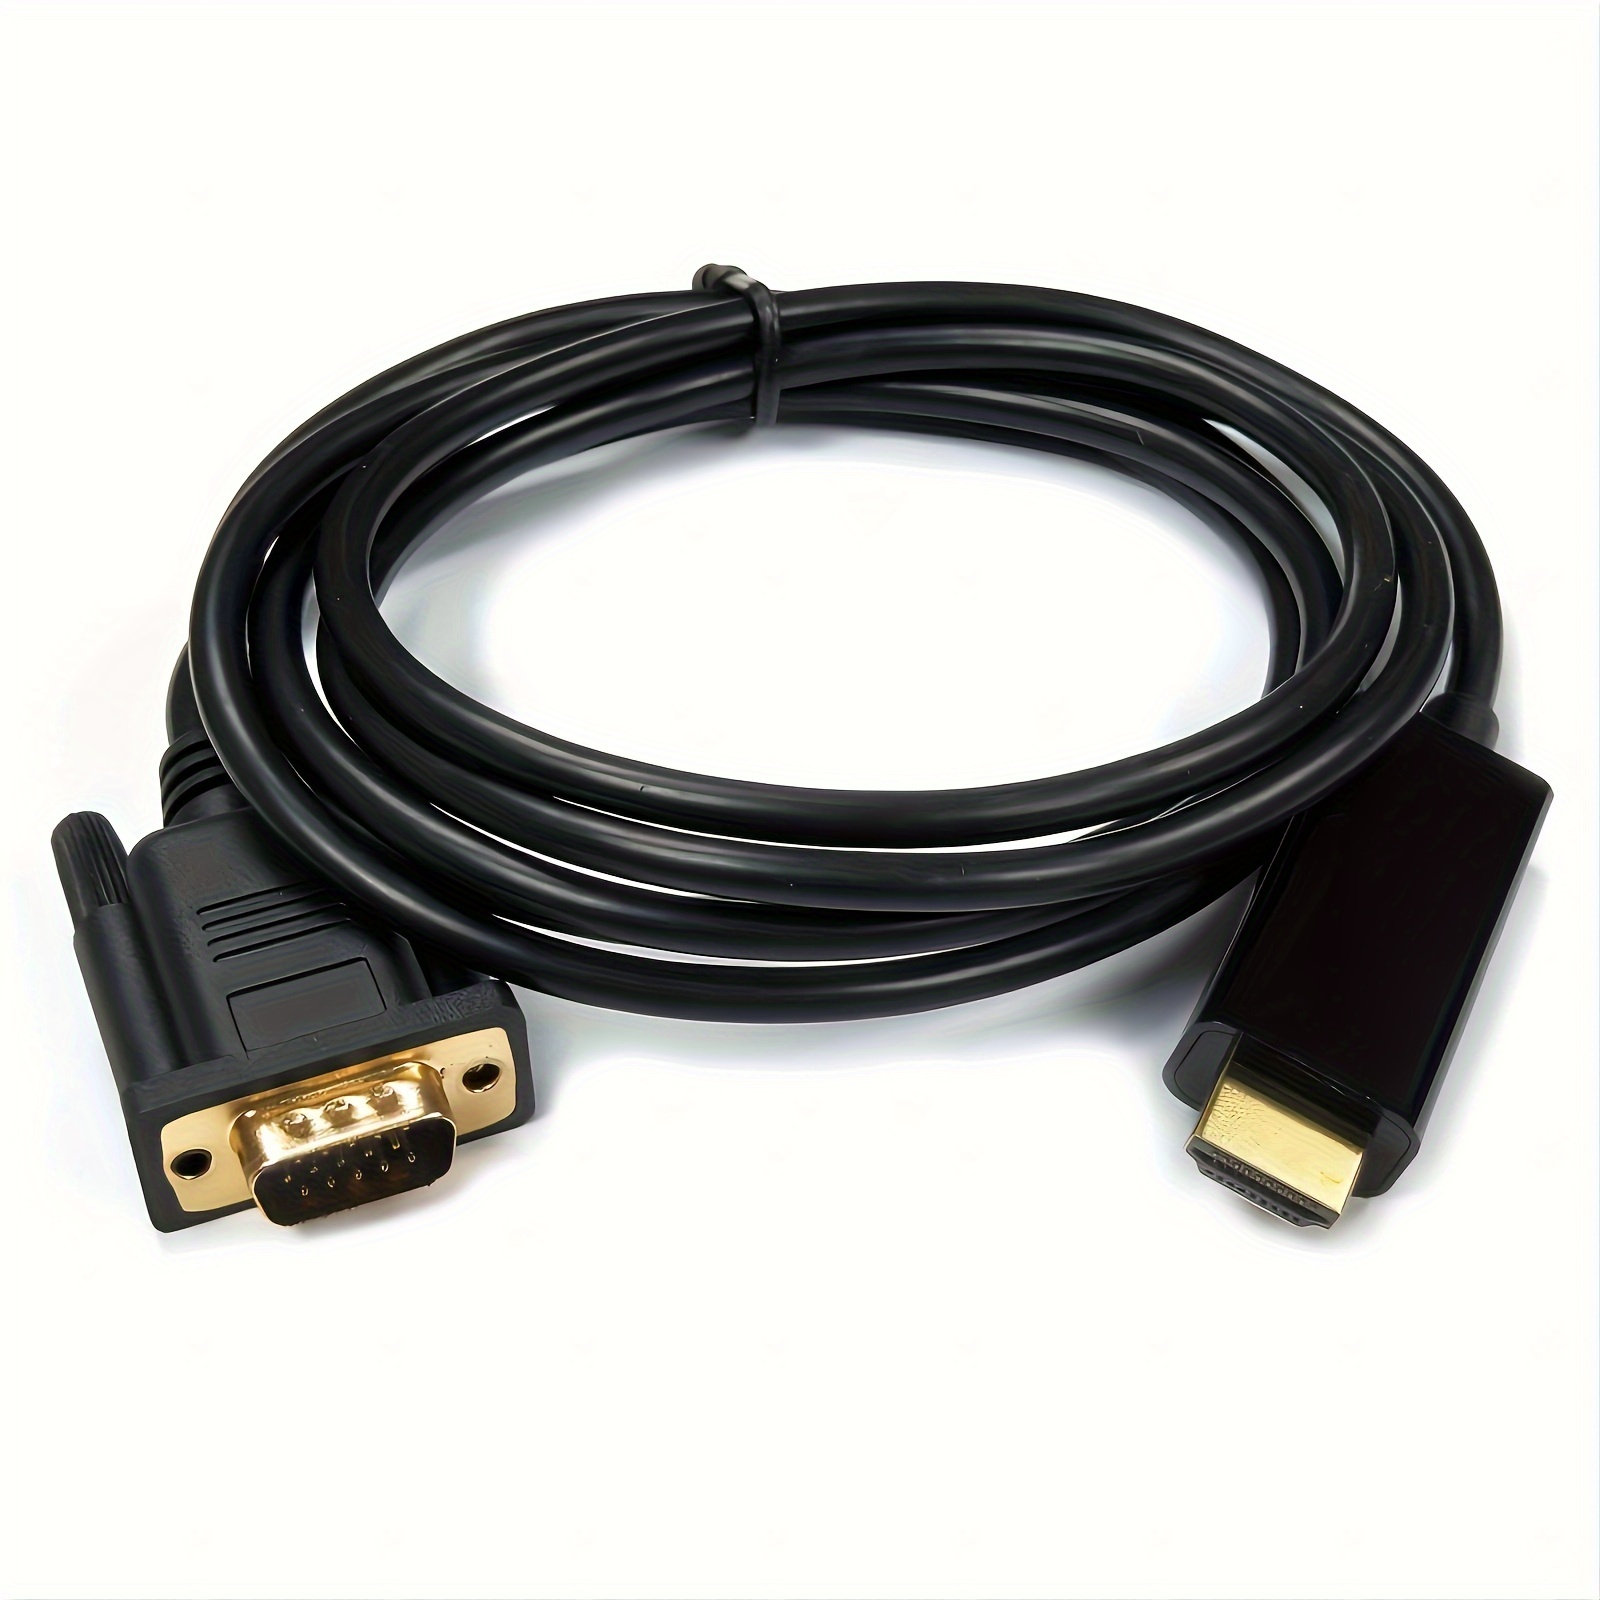 Hd Interface To Vga, Benfei Gold-plated To Vga 6-foot (about 70.87